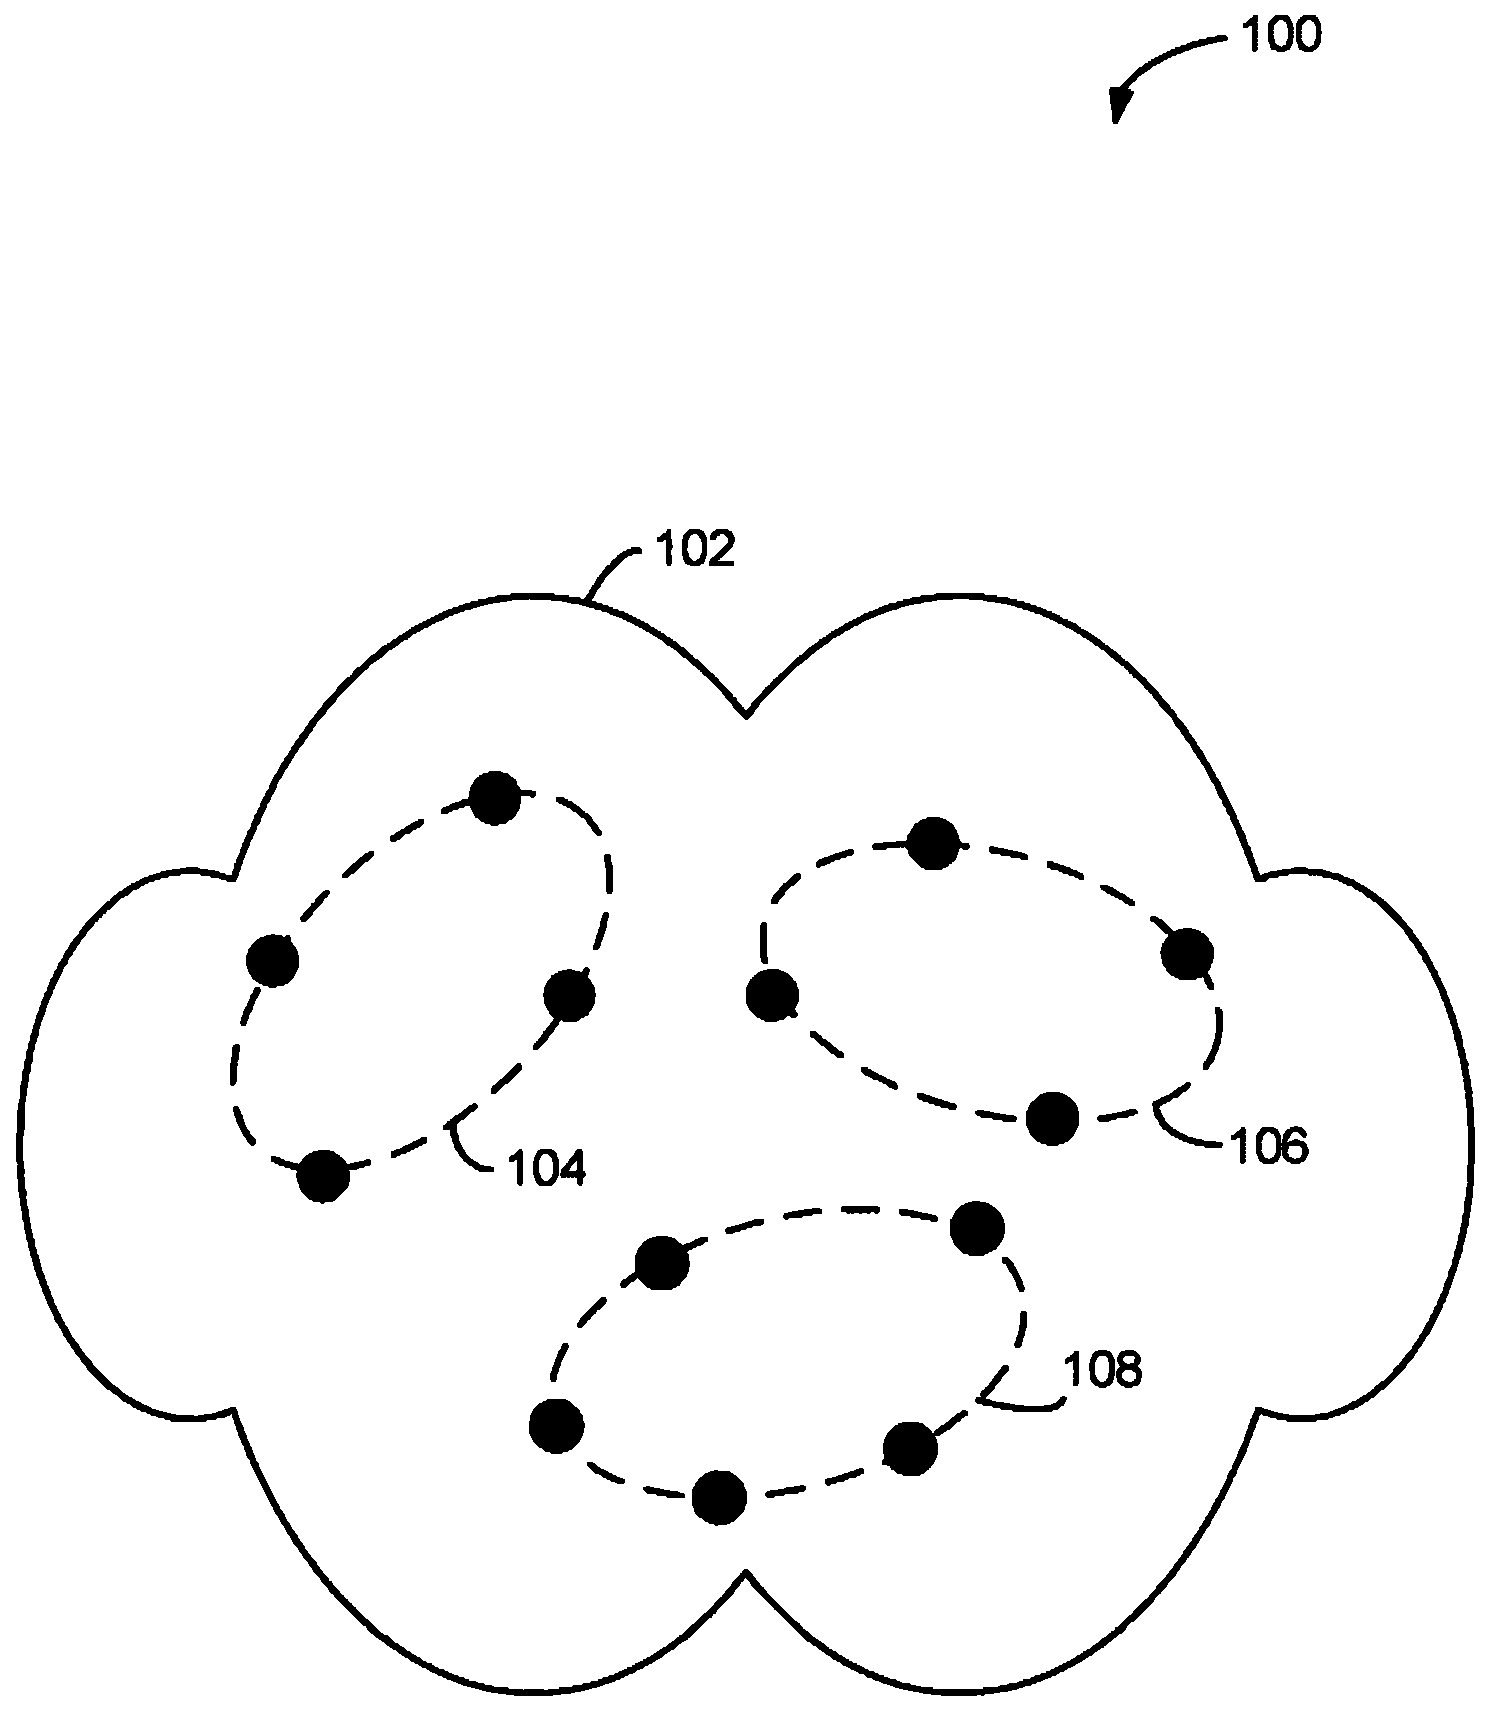 Methods and apparatus for a plug-in model for publishing structured meta-data based discovery